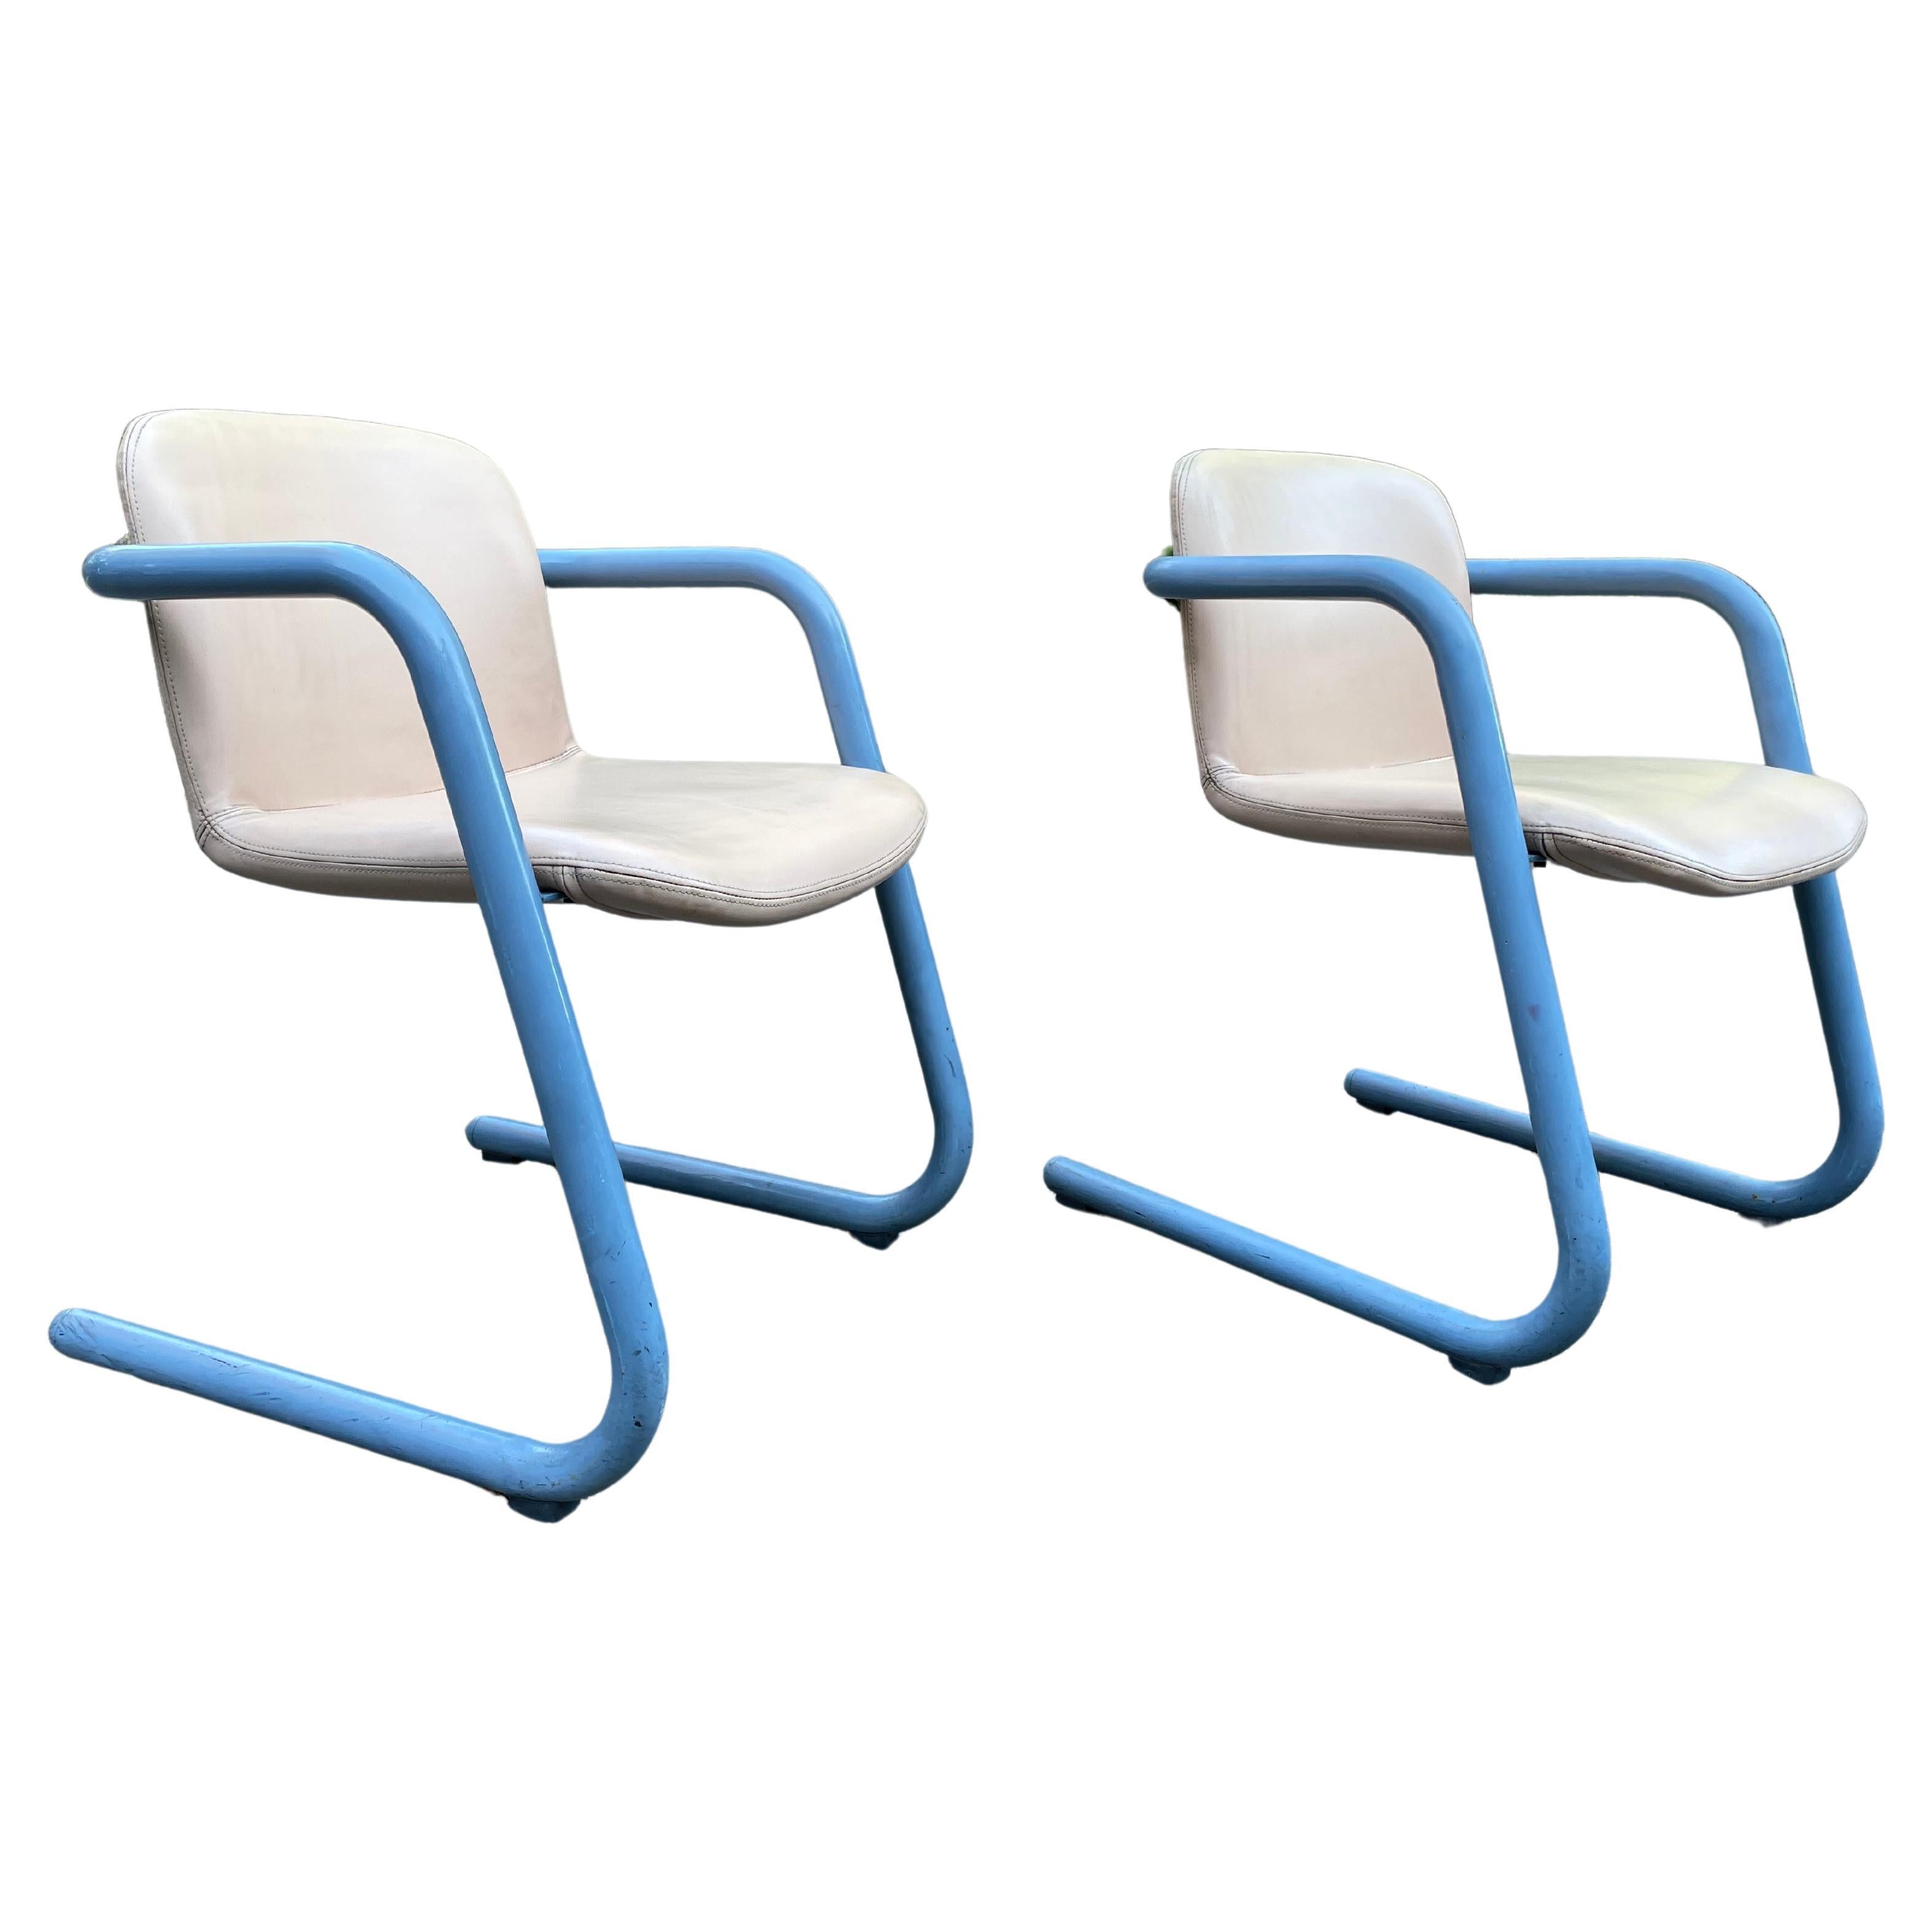 Set of 2 Vintage Kinetics Blue & Tan 100/300 Chairs, circa 1970’s in good condition. Designed by Philip Salmon and Hugh Hamilton for Kinetics.

Really cool. Price is for the pair.

Very good vintage condition with minor flaws as expected with age.